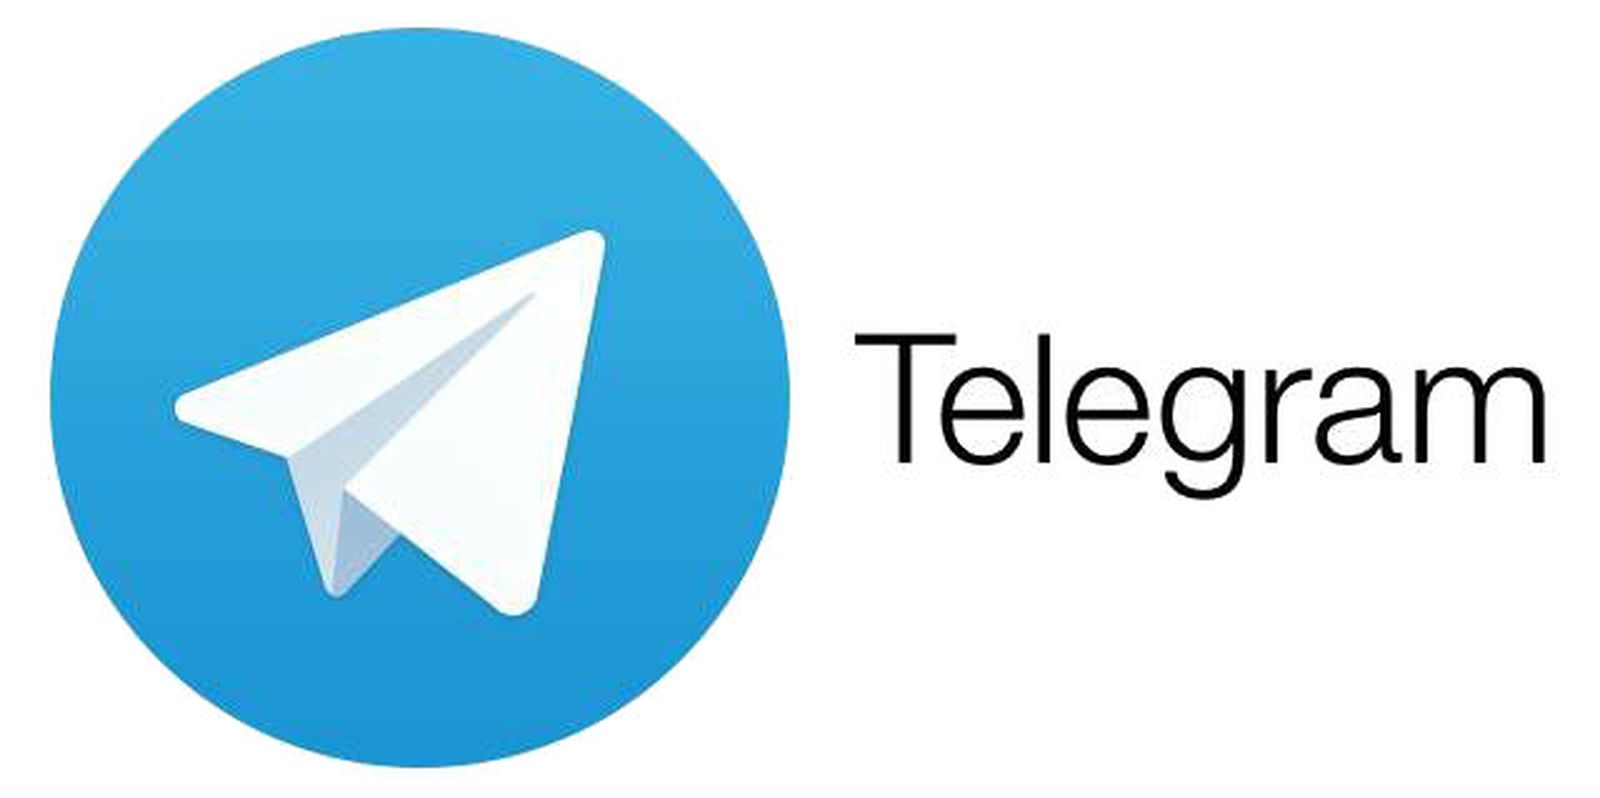 How to Download & Use Telegram on PC?